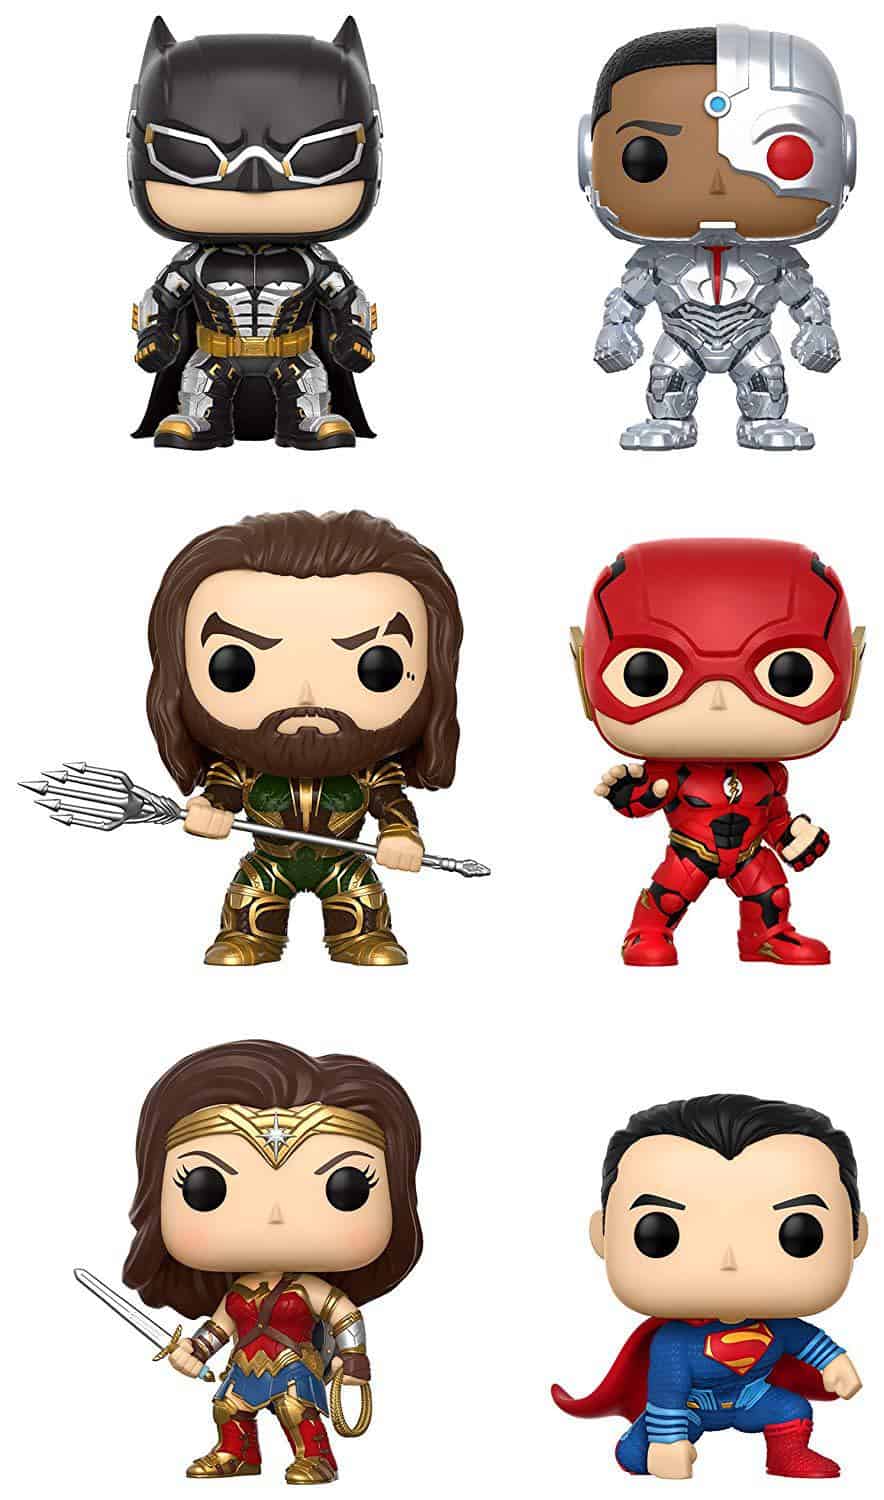 2 Unique Justice League Funko Pop Variant For You To Choose From 1